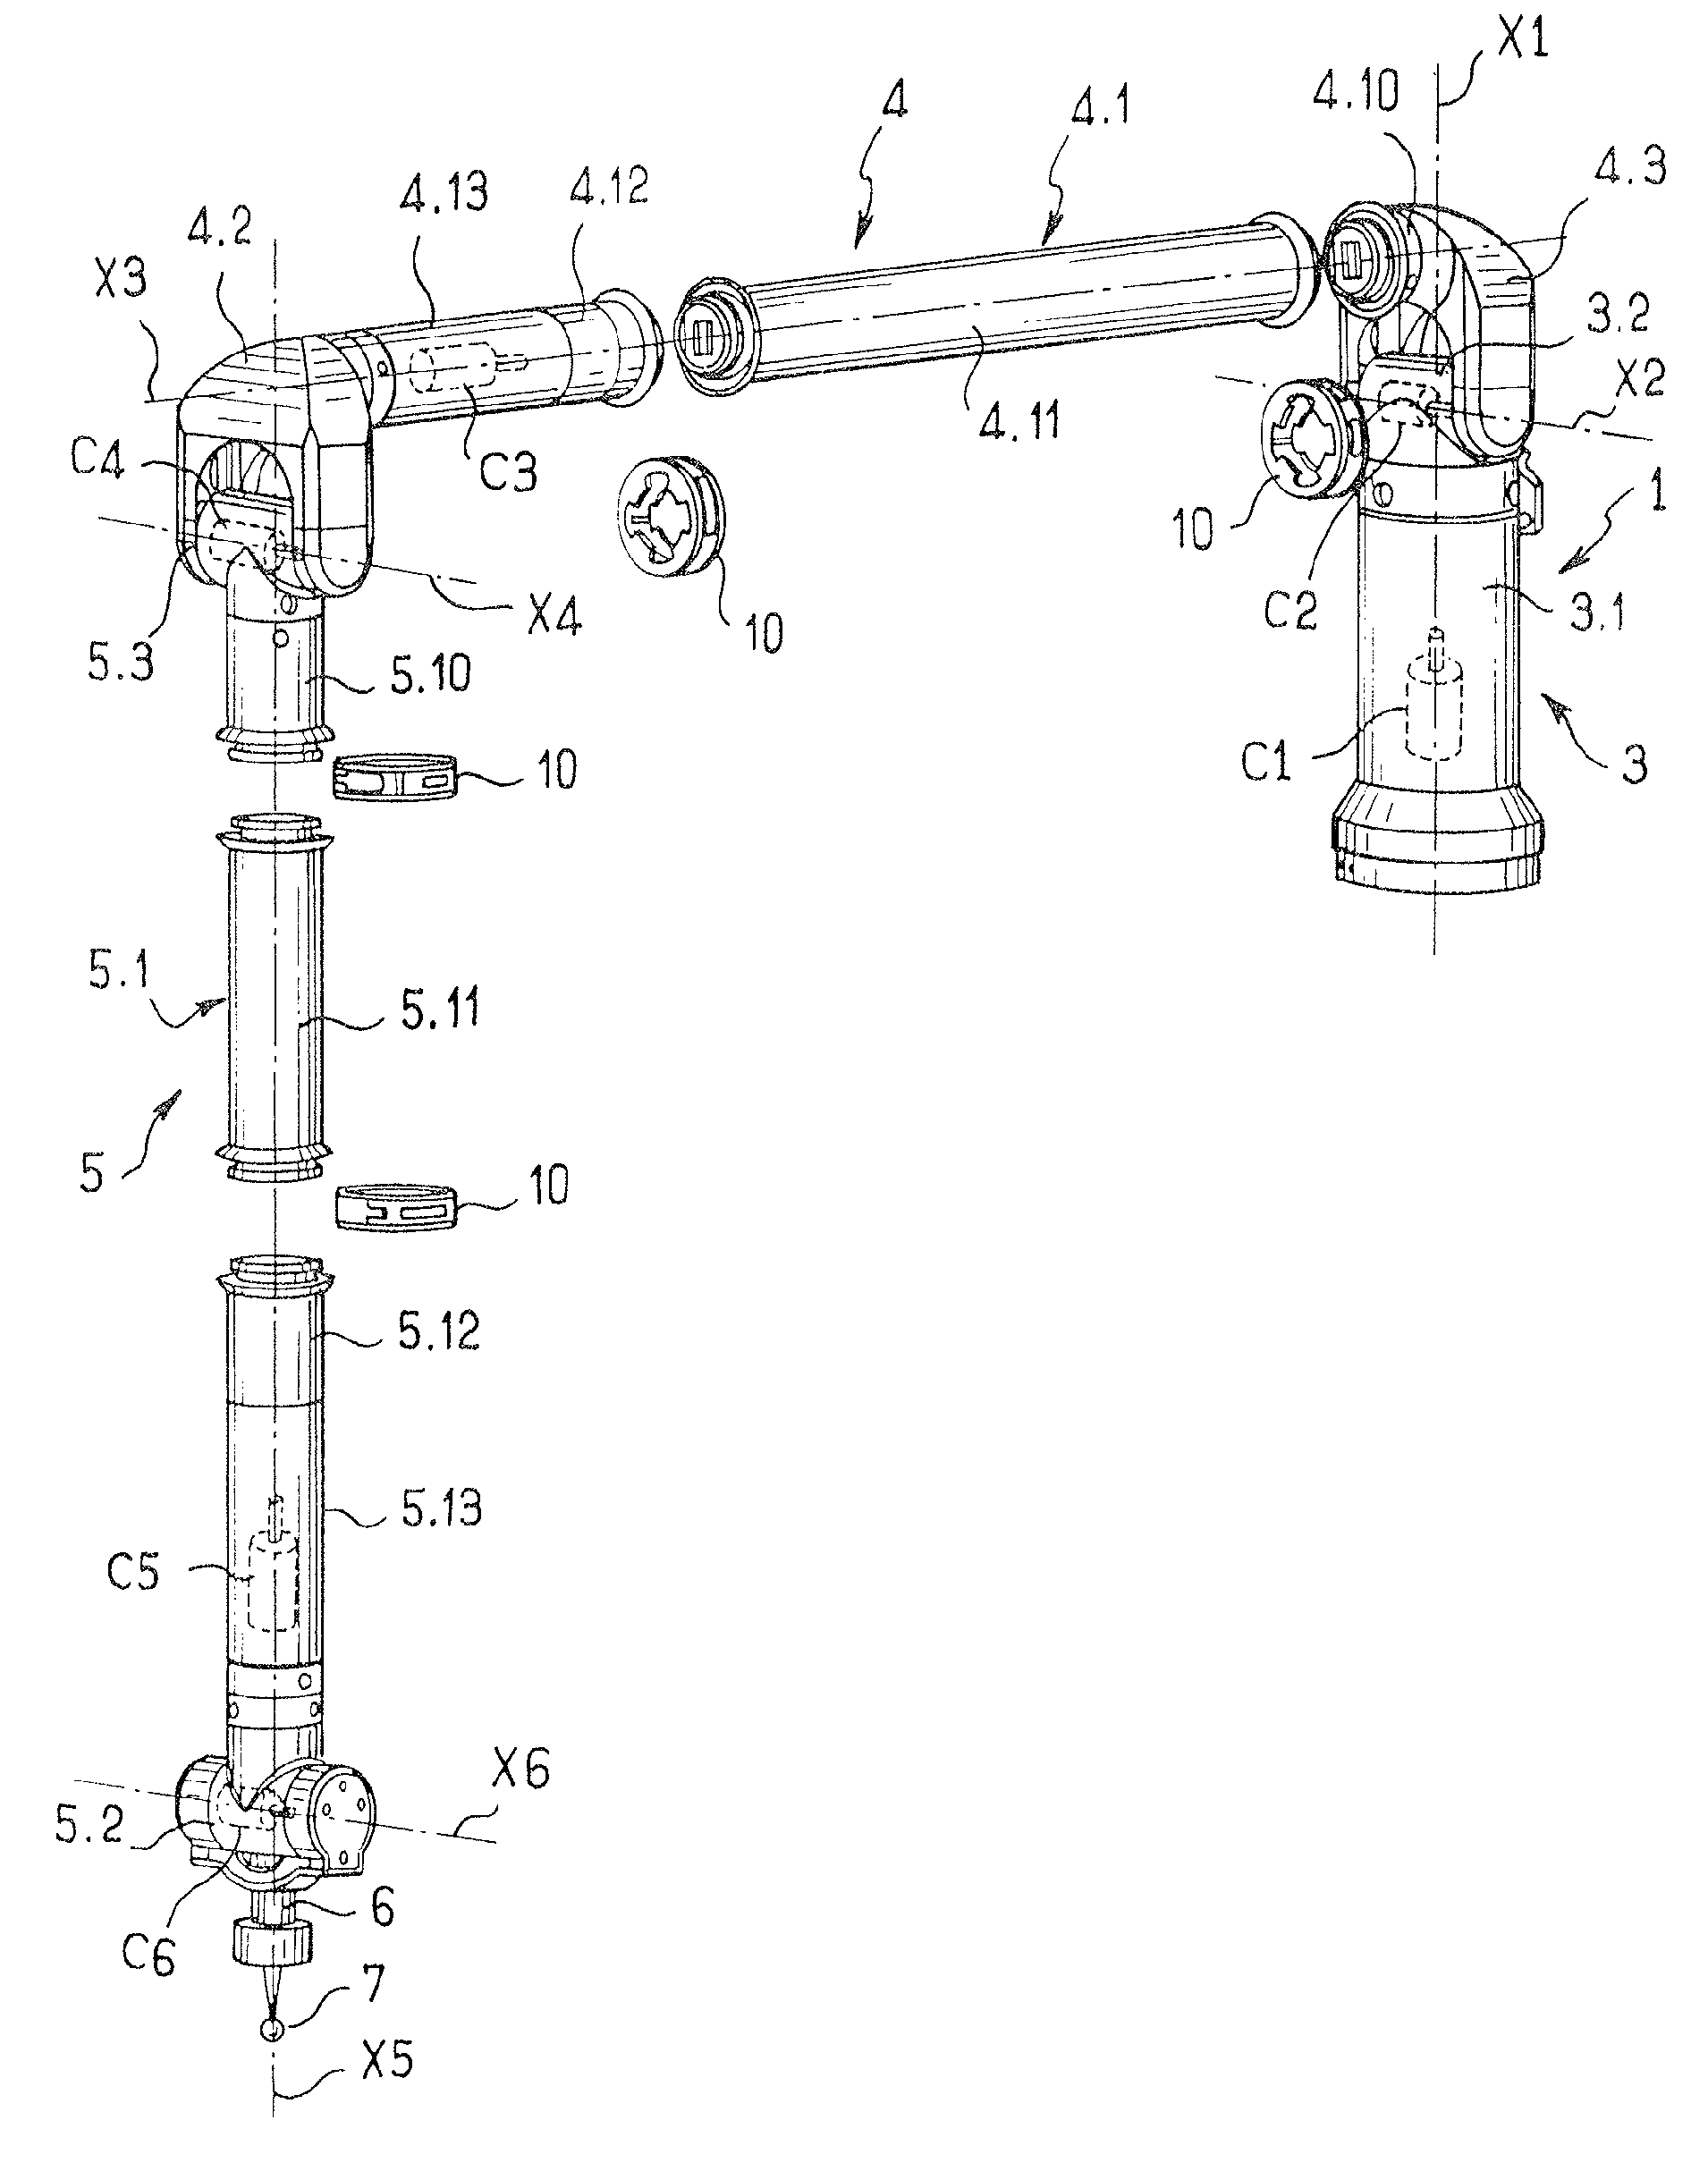 Articulated-arm three-dimensional measurement apparatus having a plurality of articulated axes